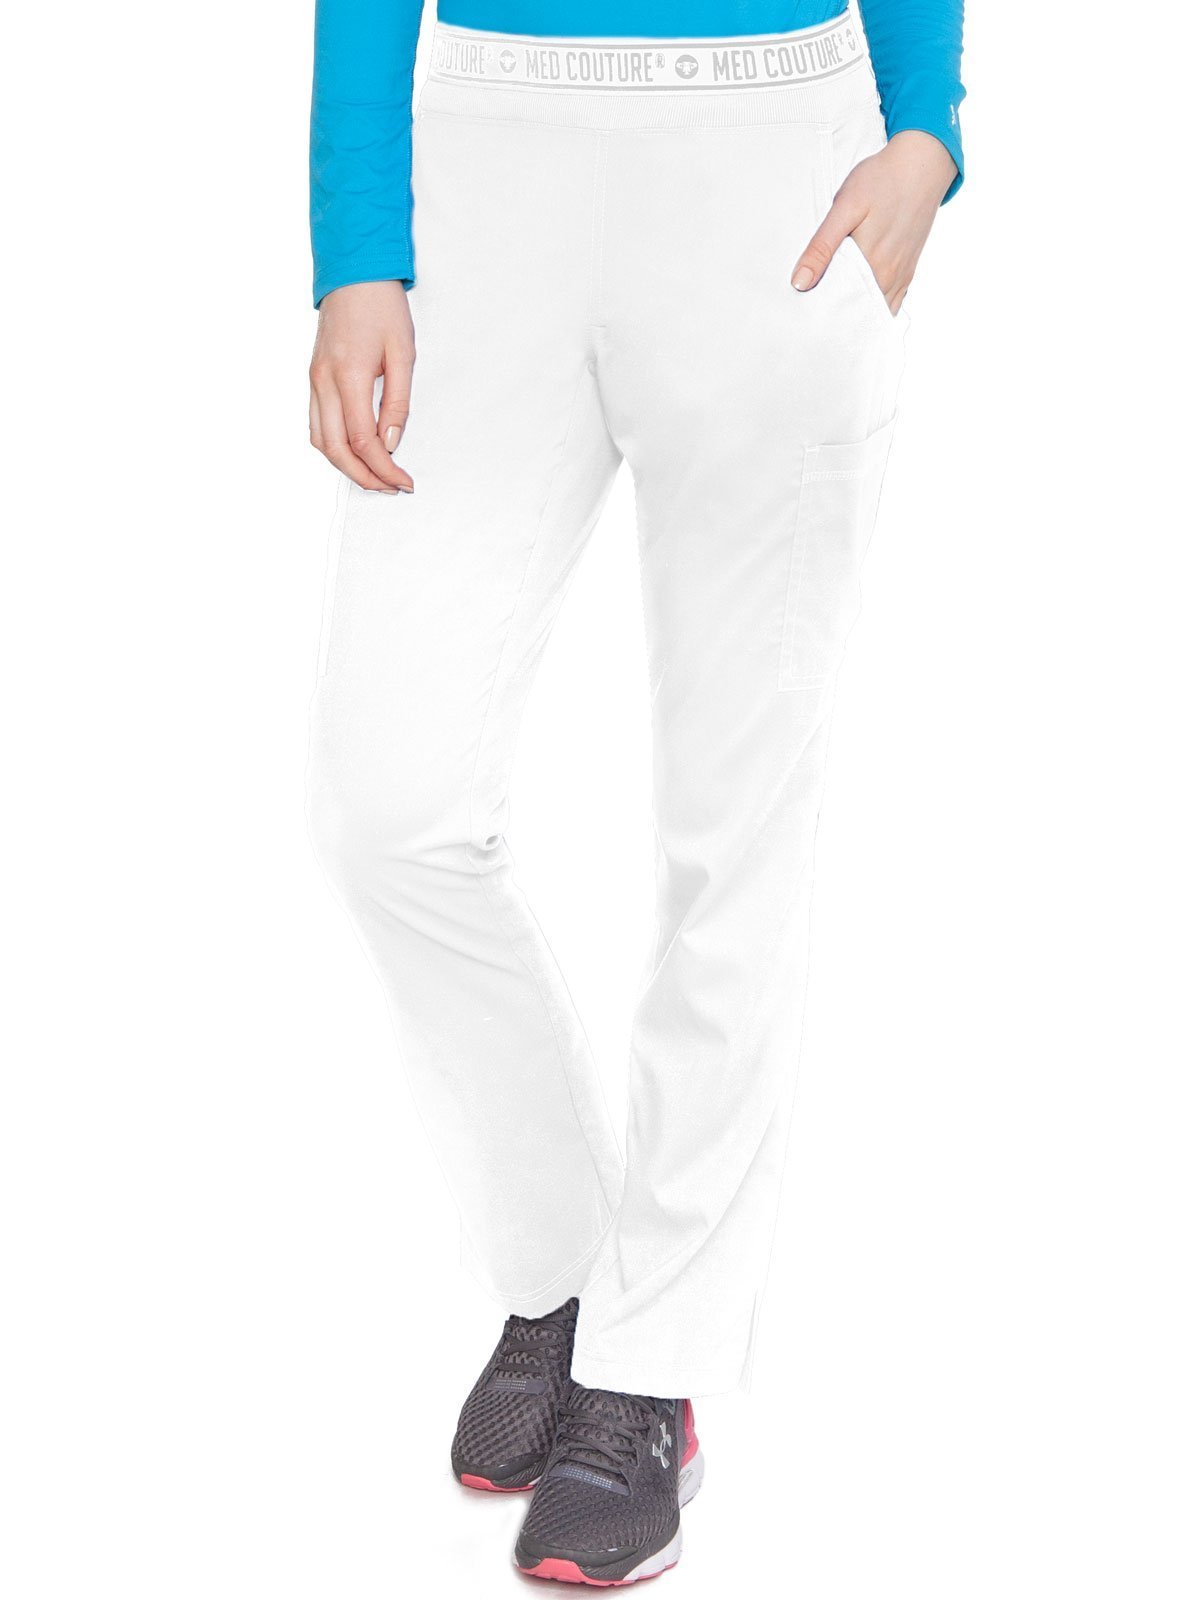 Med Couture Yoga Cargo Pant (T)